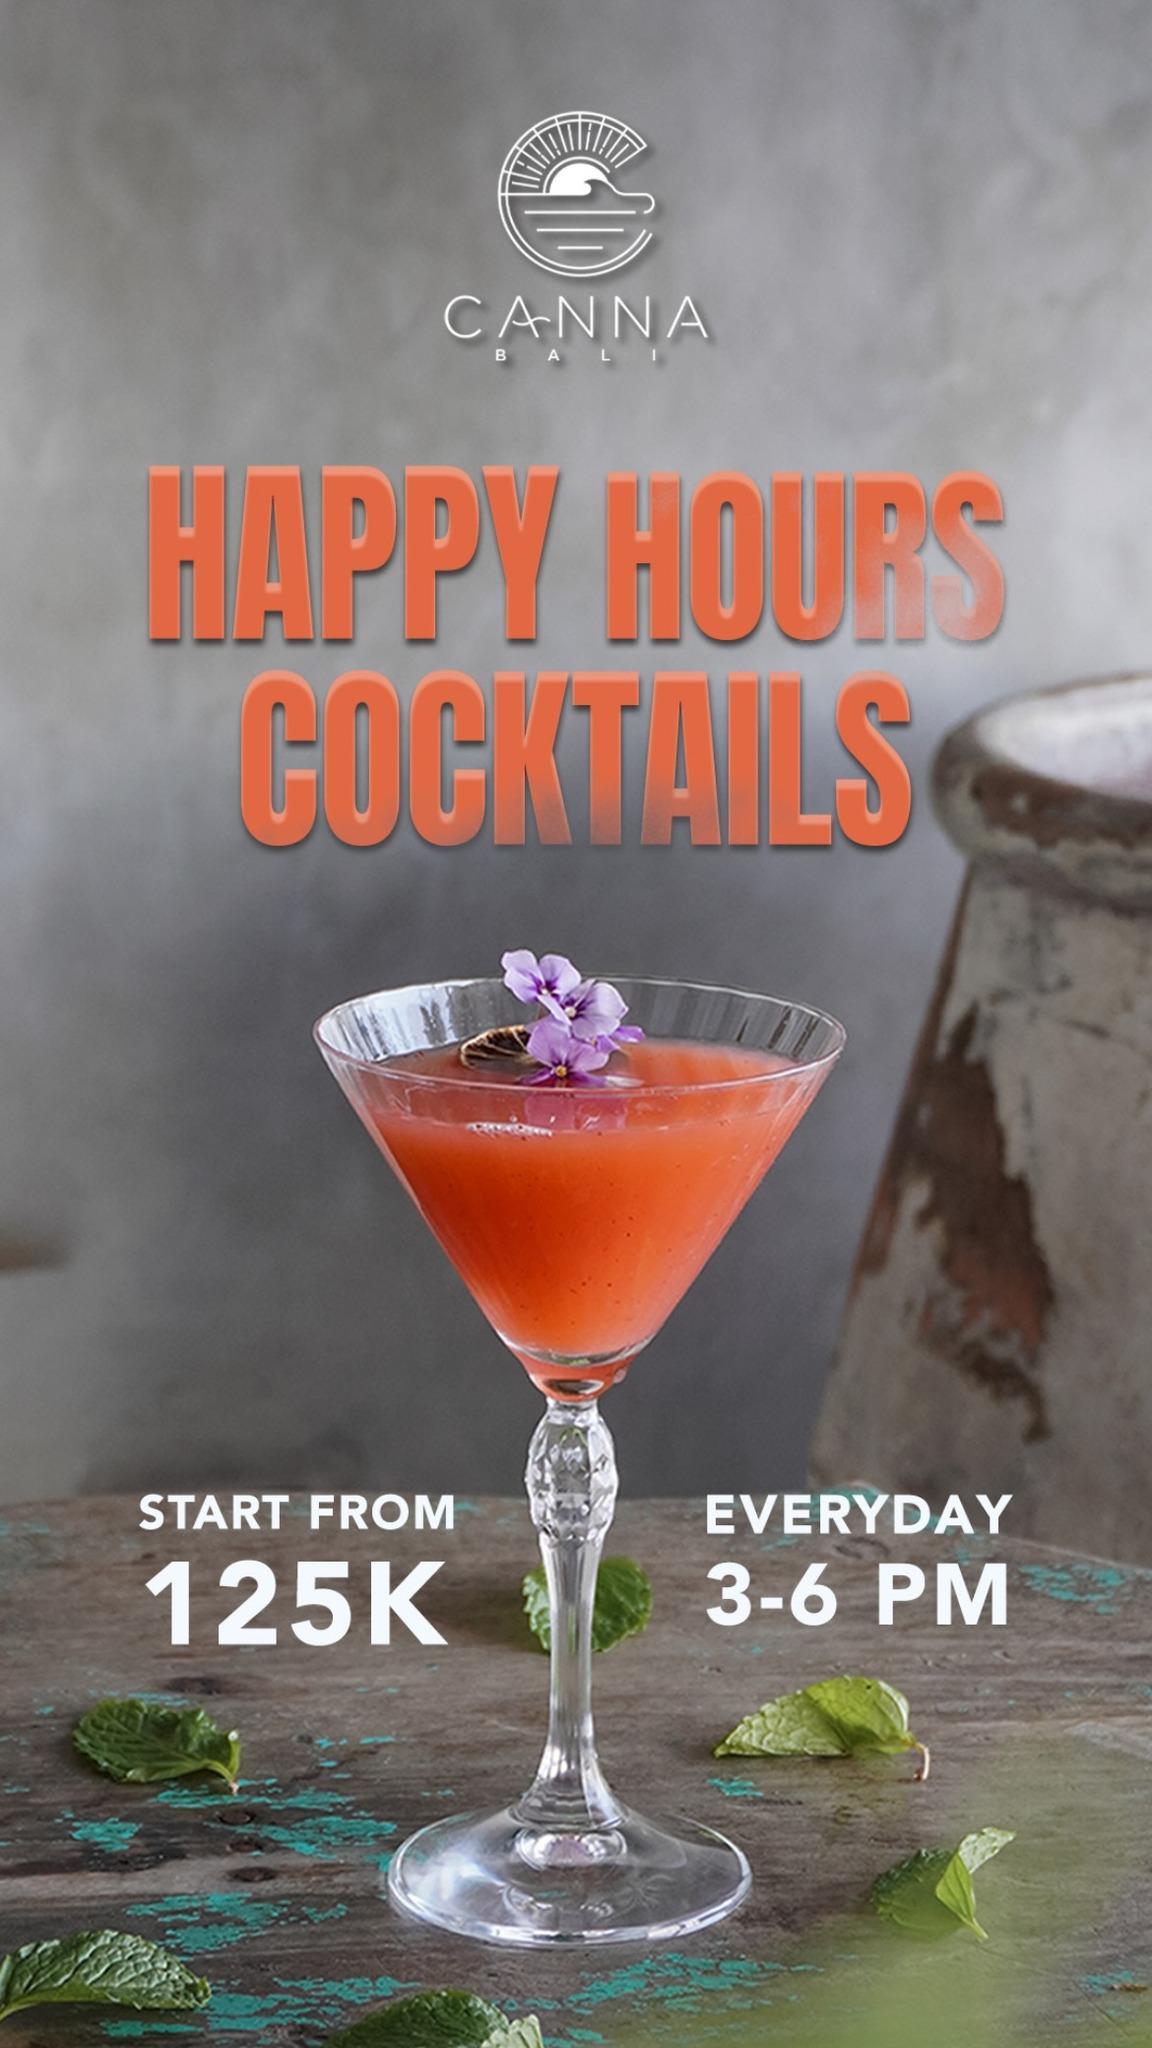 Happy Hours Cocktails at Canna Bali 3-6PM